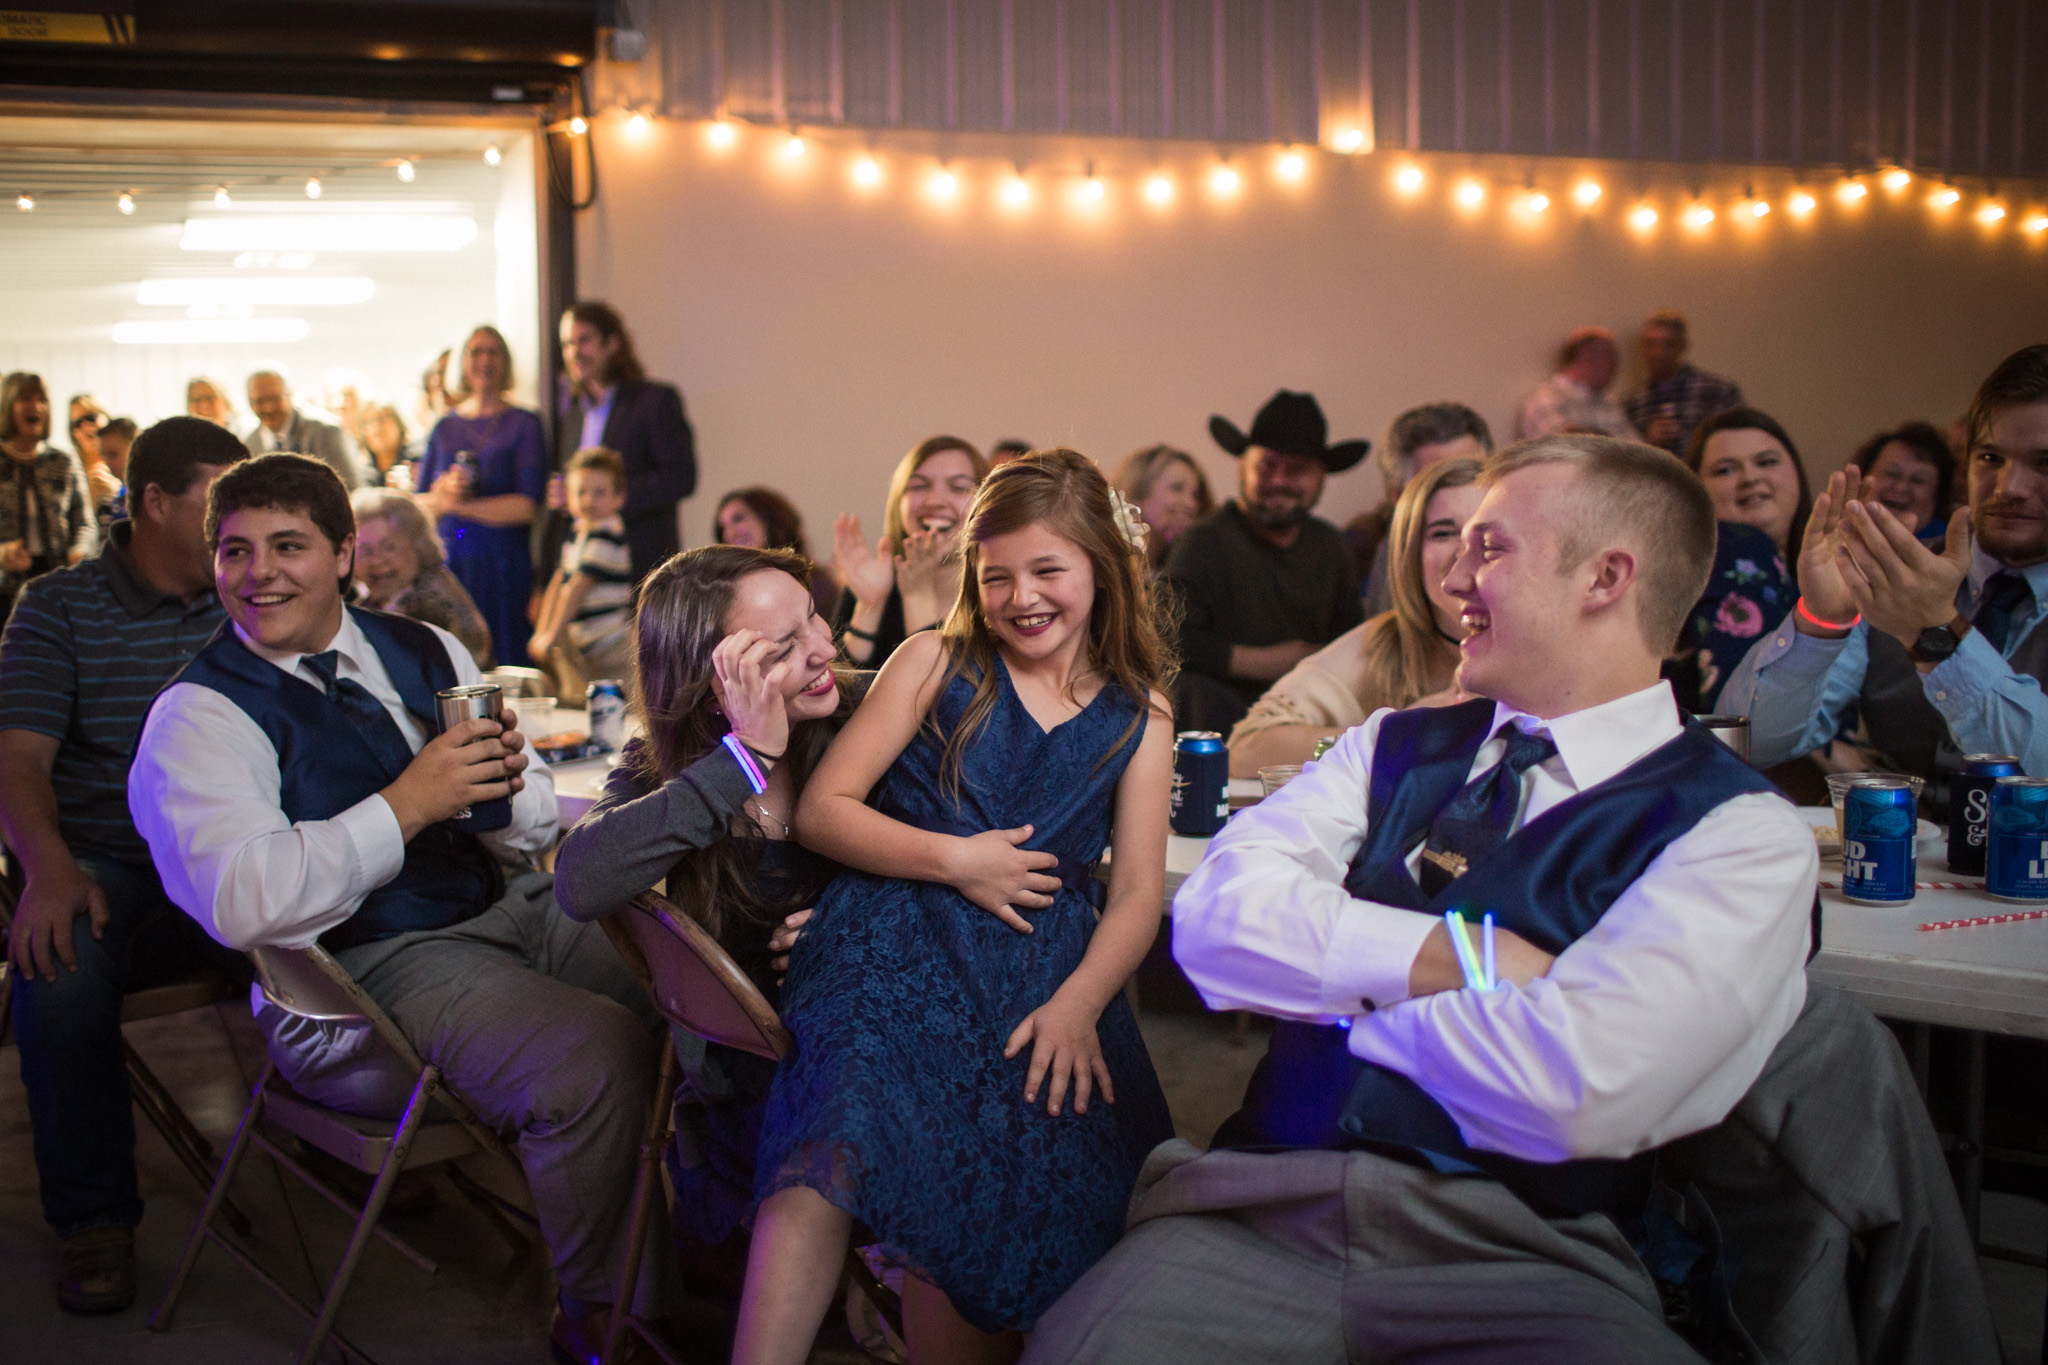 Zibell Spring Wedding, Bride and Groom, Powerful, Connected, Exploration, Laura Duggleby Photography -147.JPG